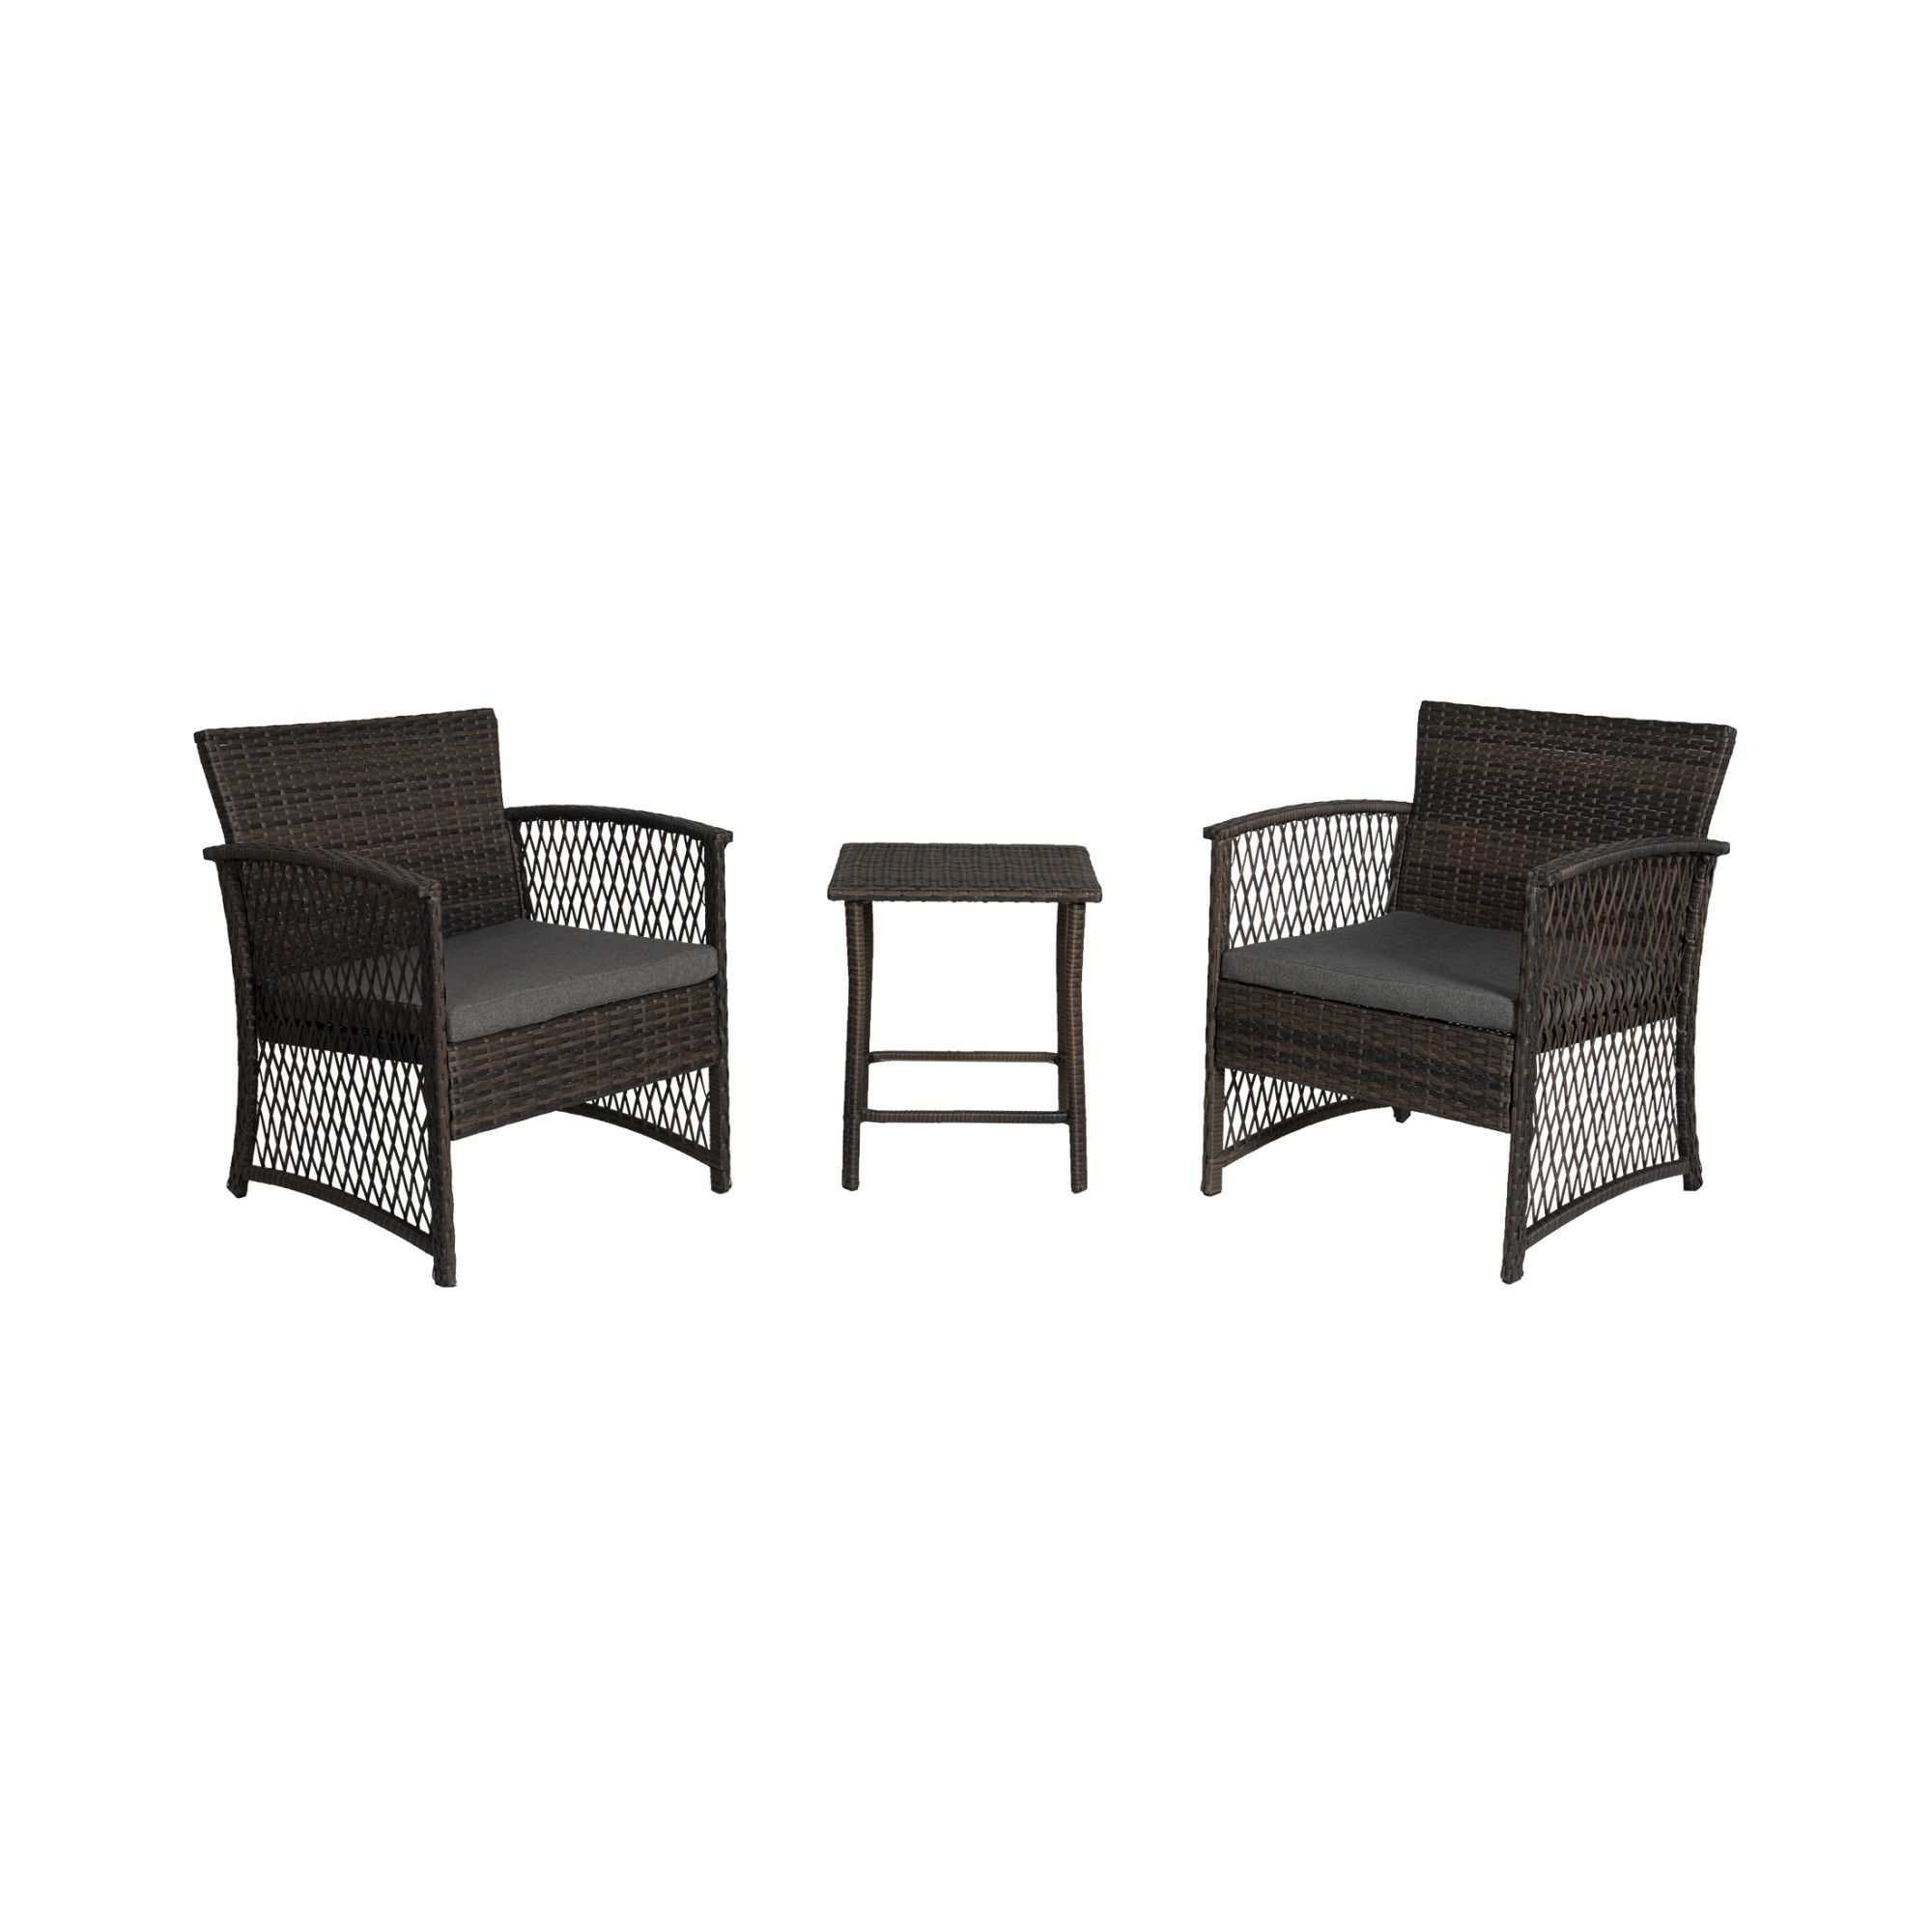 Westintrends 3Pc Rattan Wicker Bistro Conversation Seating Set For For Gray All Weather Outdoor Seating Patio Sets (View 12 of 15)